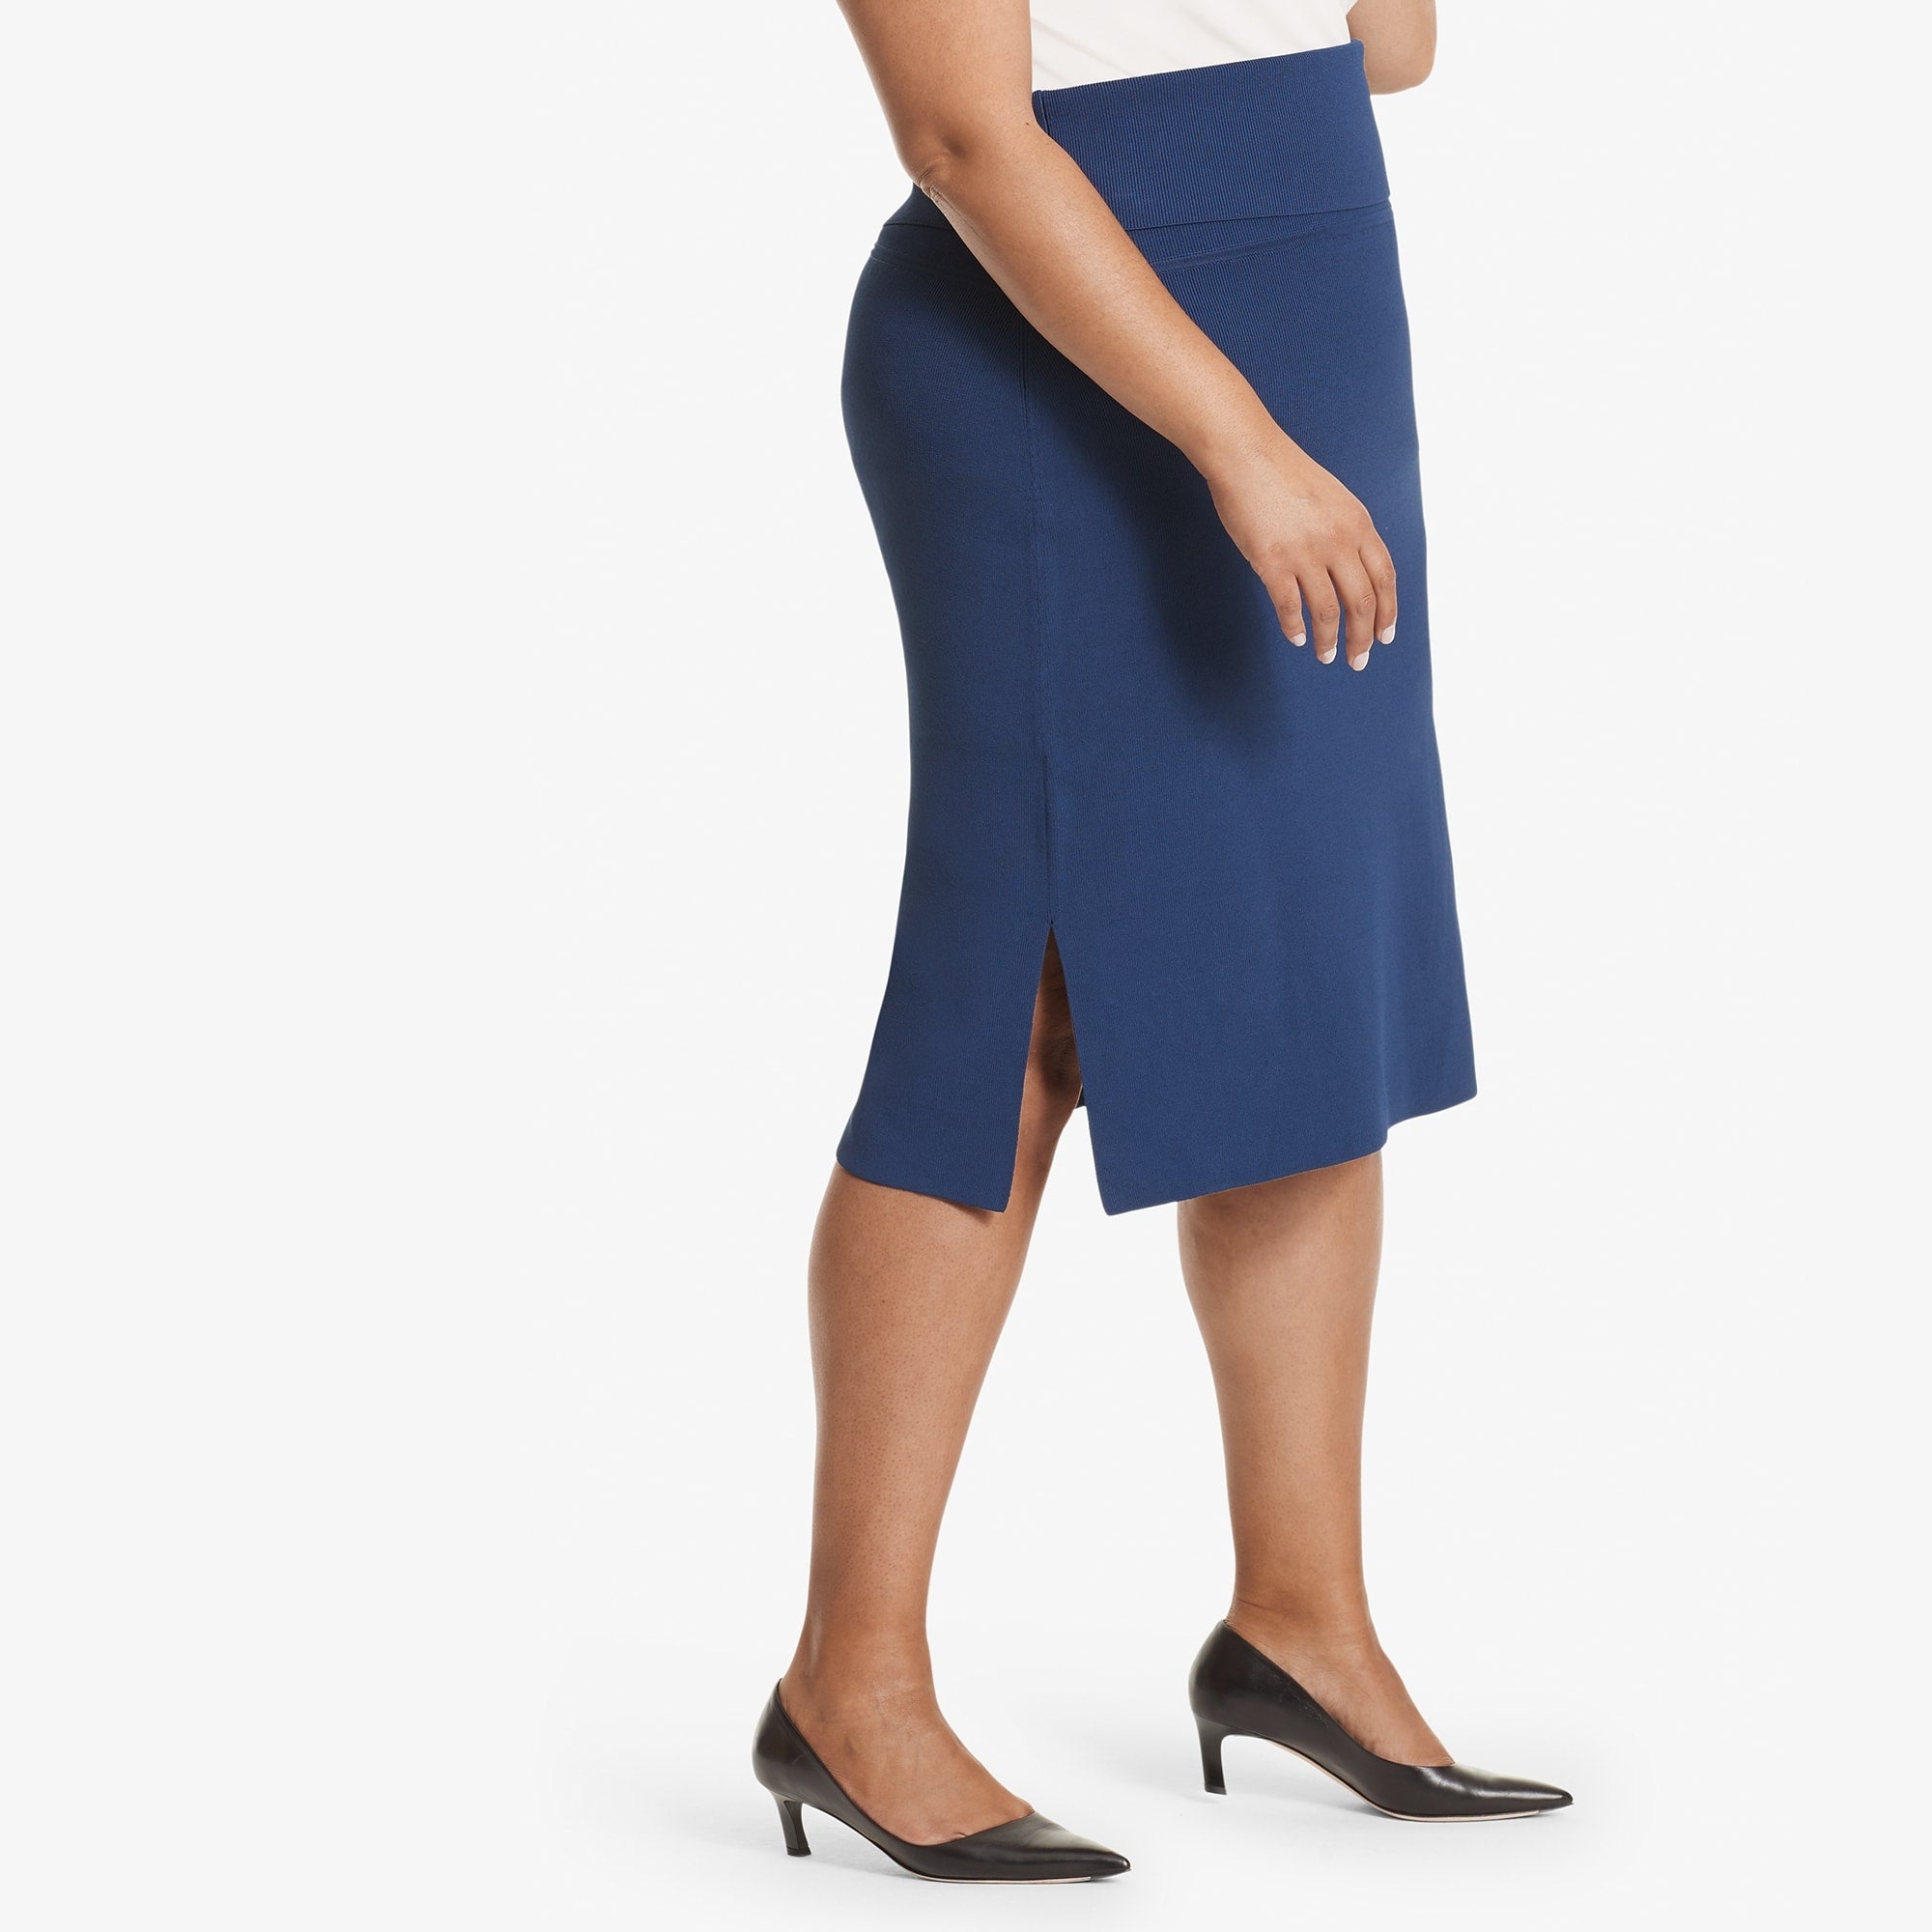 Side image of a woman standing wearing the Harlem skirt in Regent blue